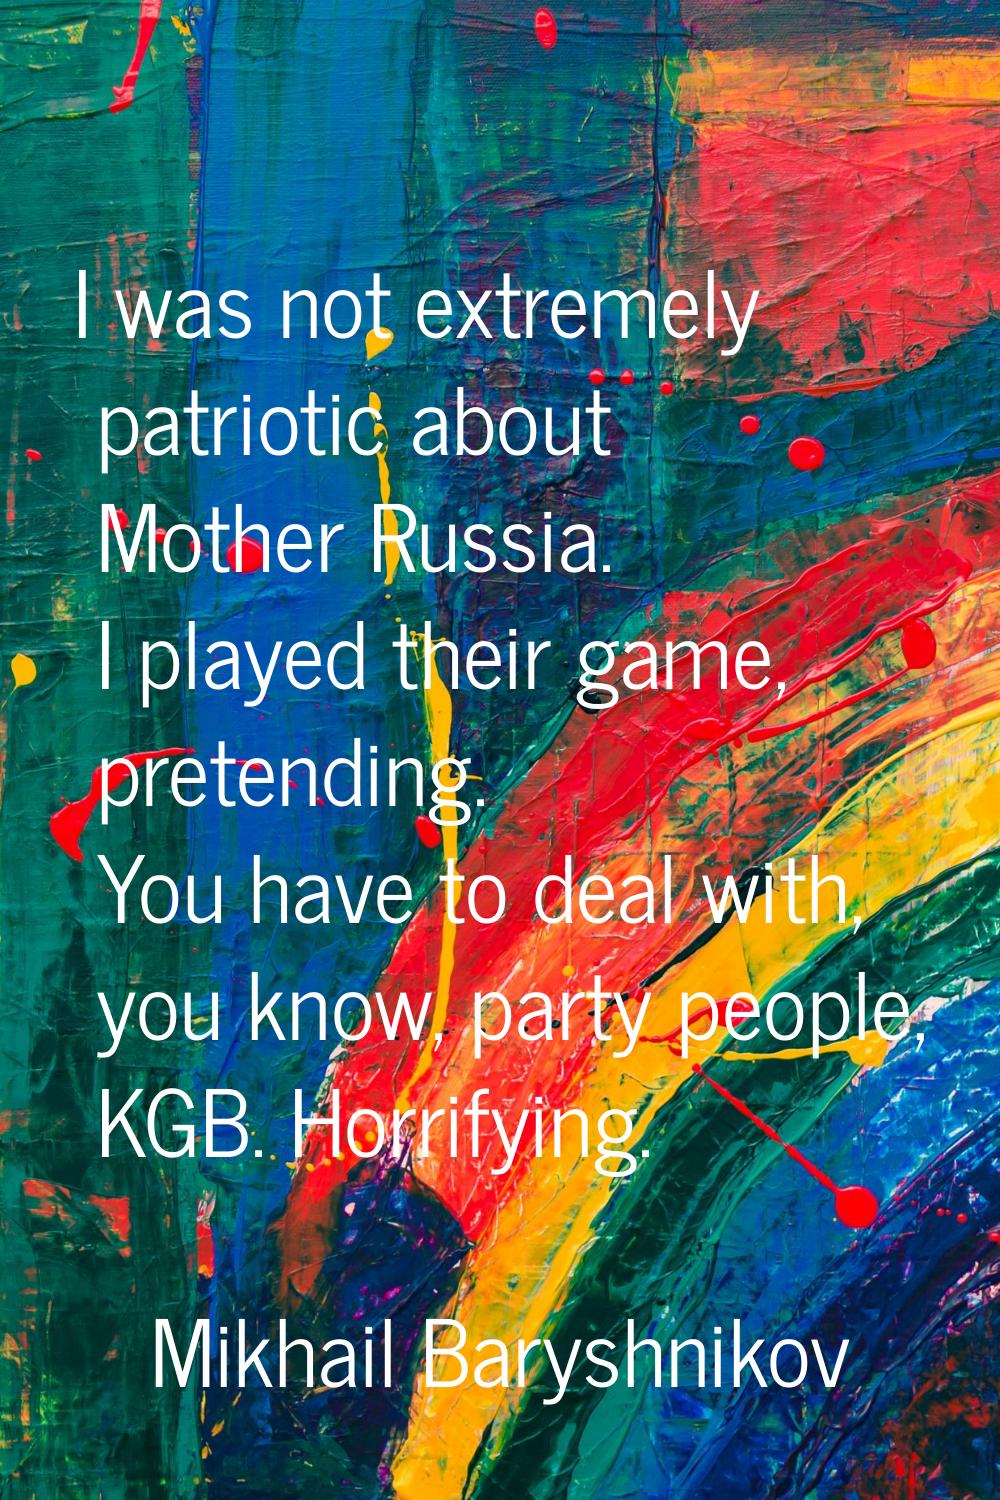 I was not extremely patriotic about Mother Russia. I played their game, pretending. You have to dea